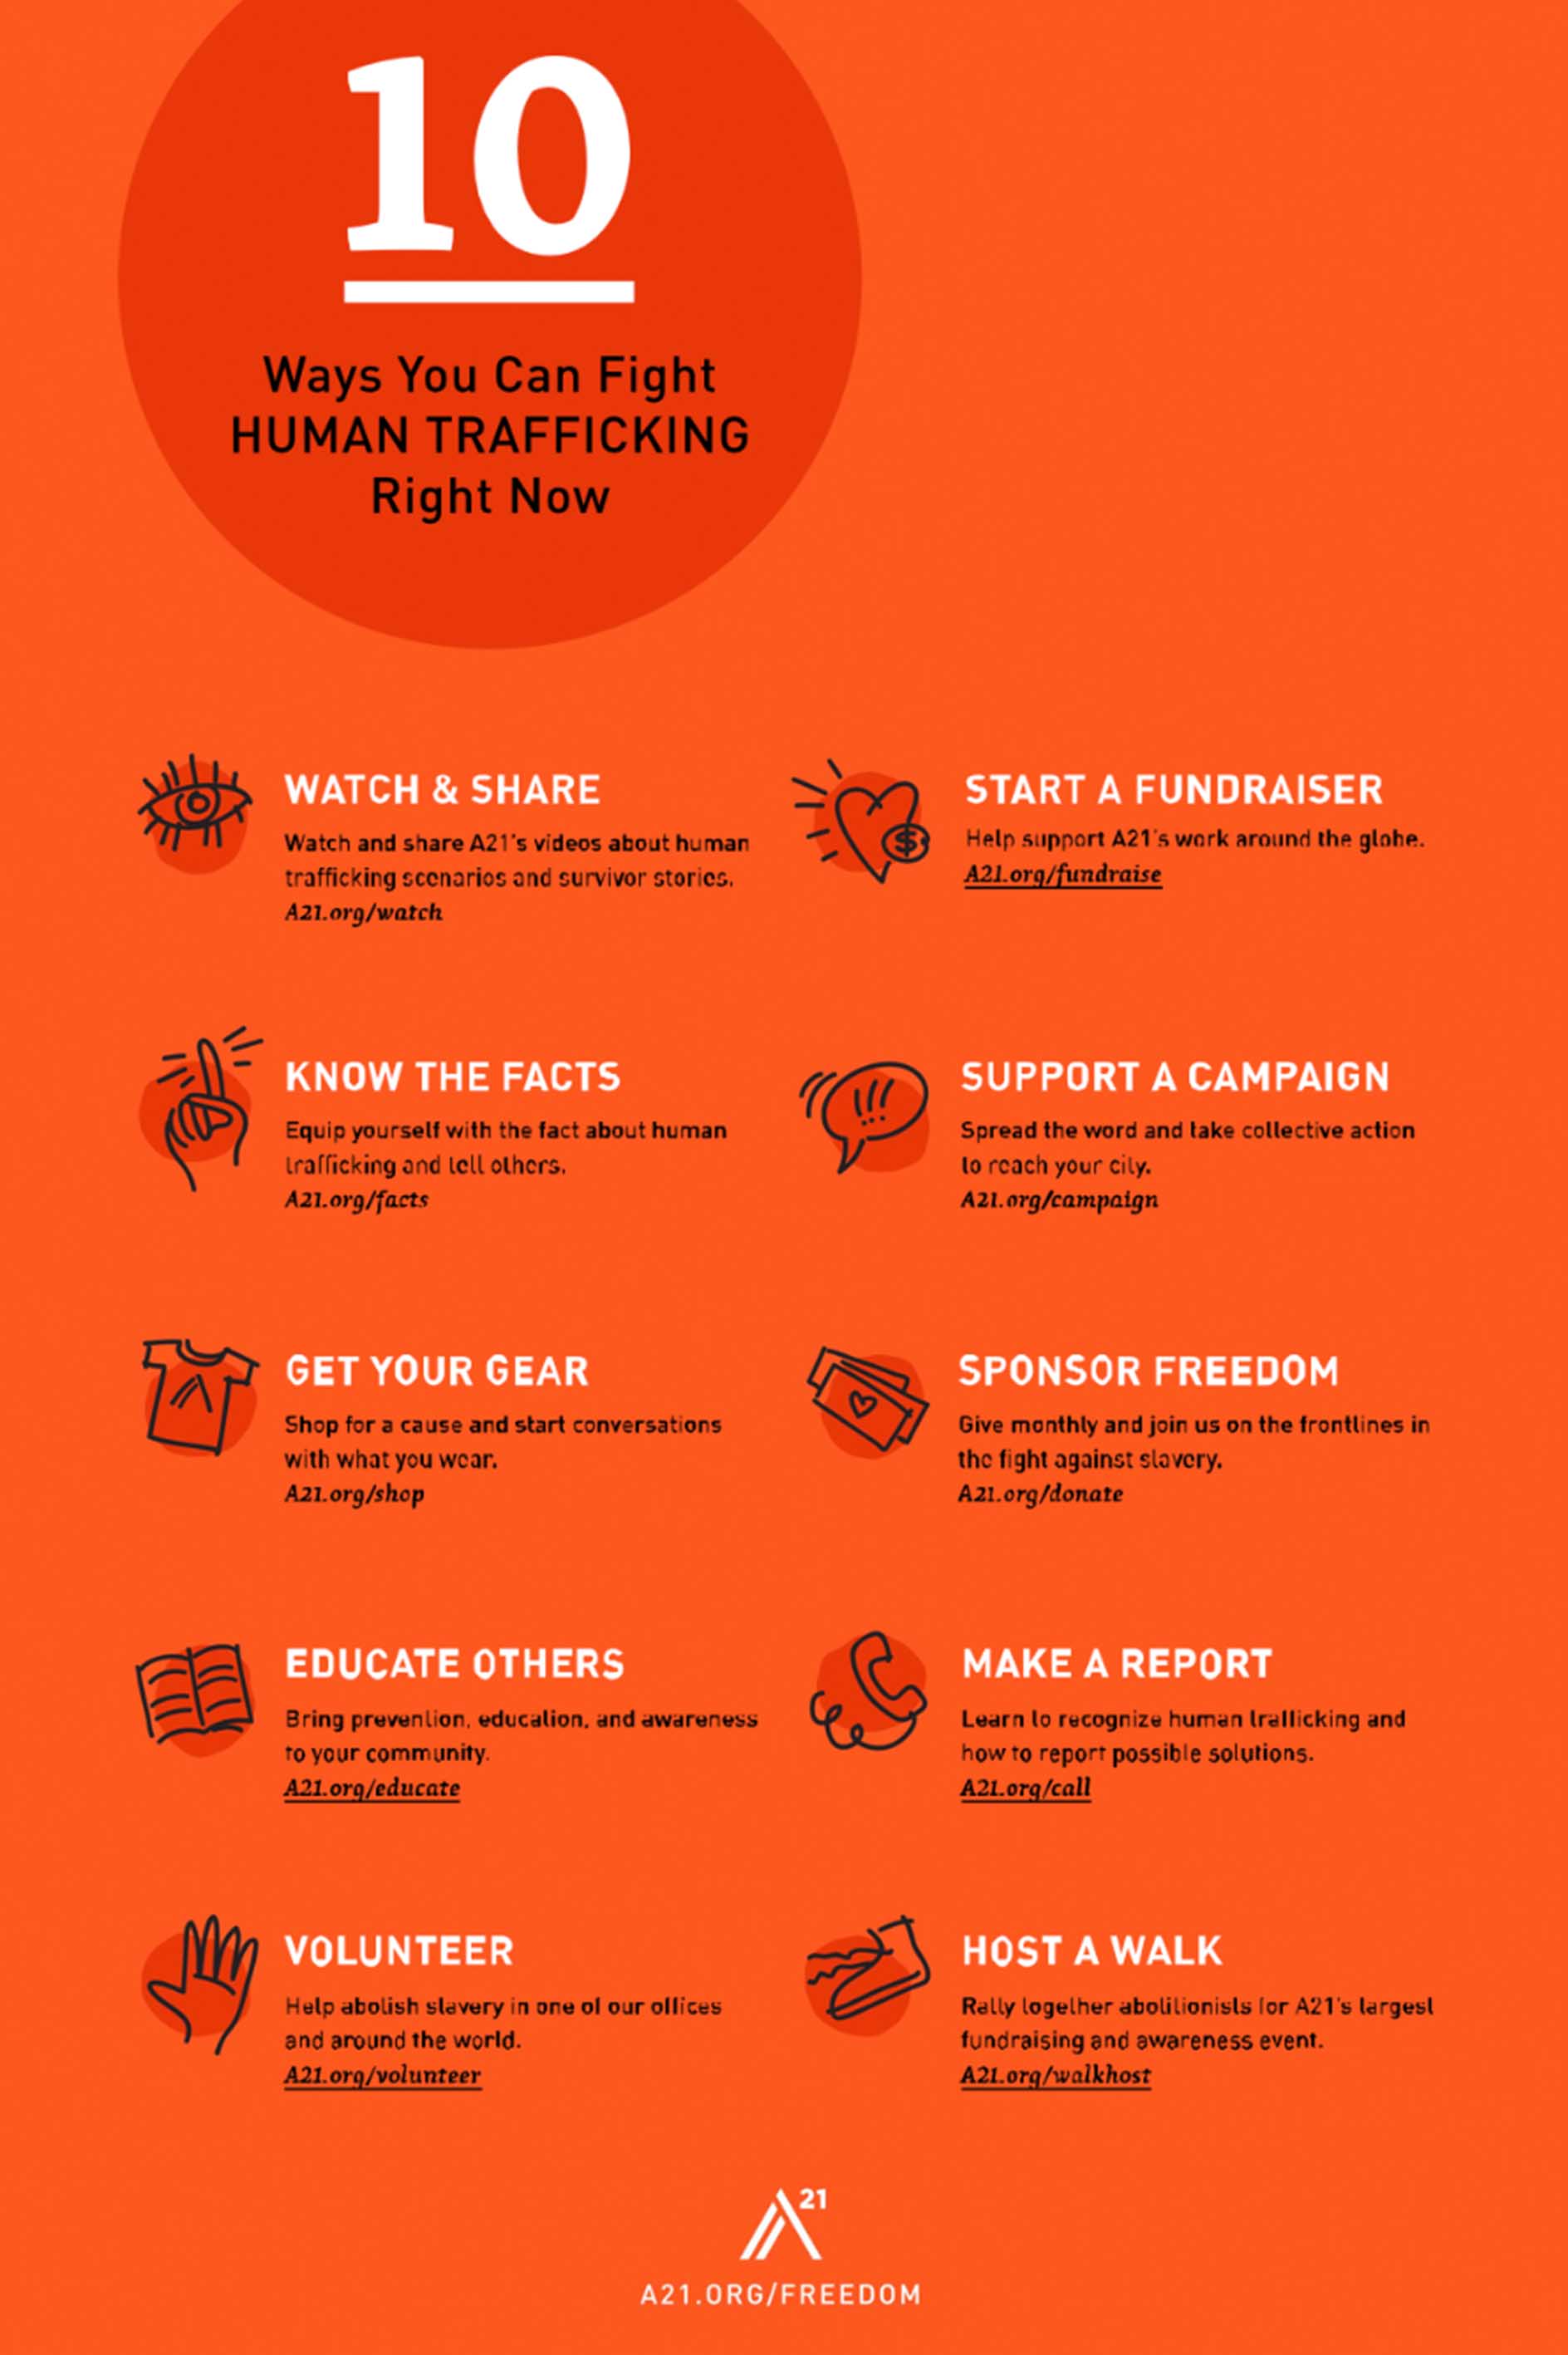 Poster 6: 10 Ways you can fight Human Trafficking right now. 1. Watch and Share. 2. Know the facts. 3. Get Your Gear. 4. Educate Others. 5. Volunteer. 6. Start a Fundraiser. 7. Support A Campaign. 8. Sponsor Freedom. 9. Make A Report. 10. Host A Walk.